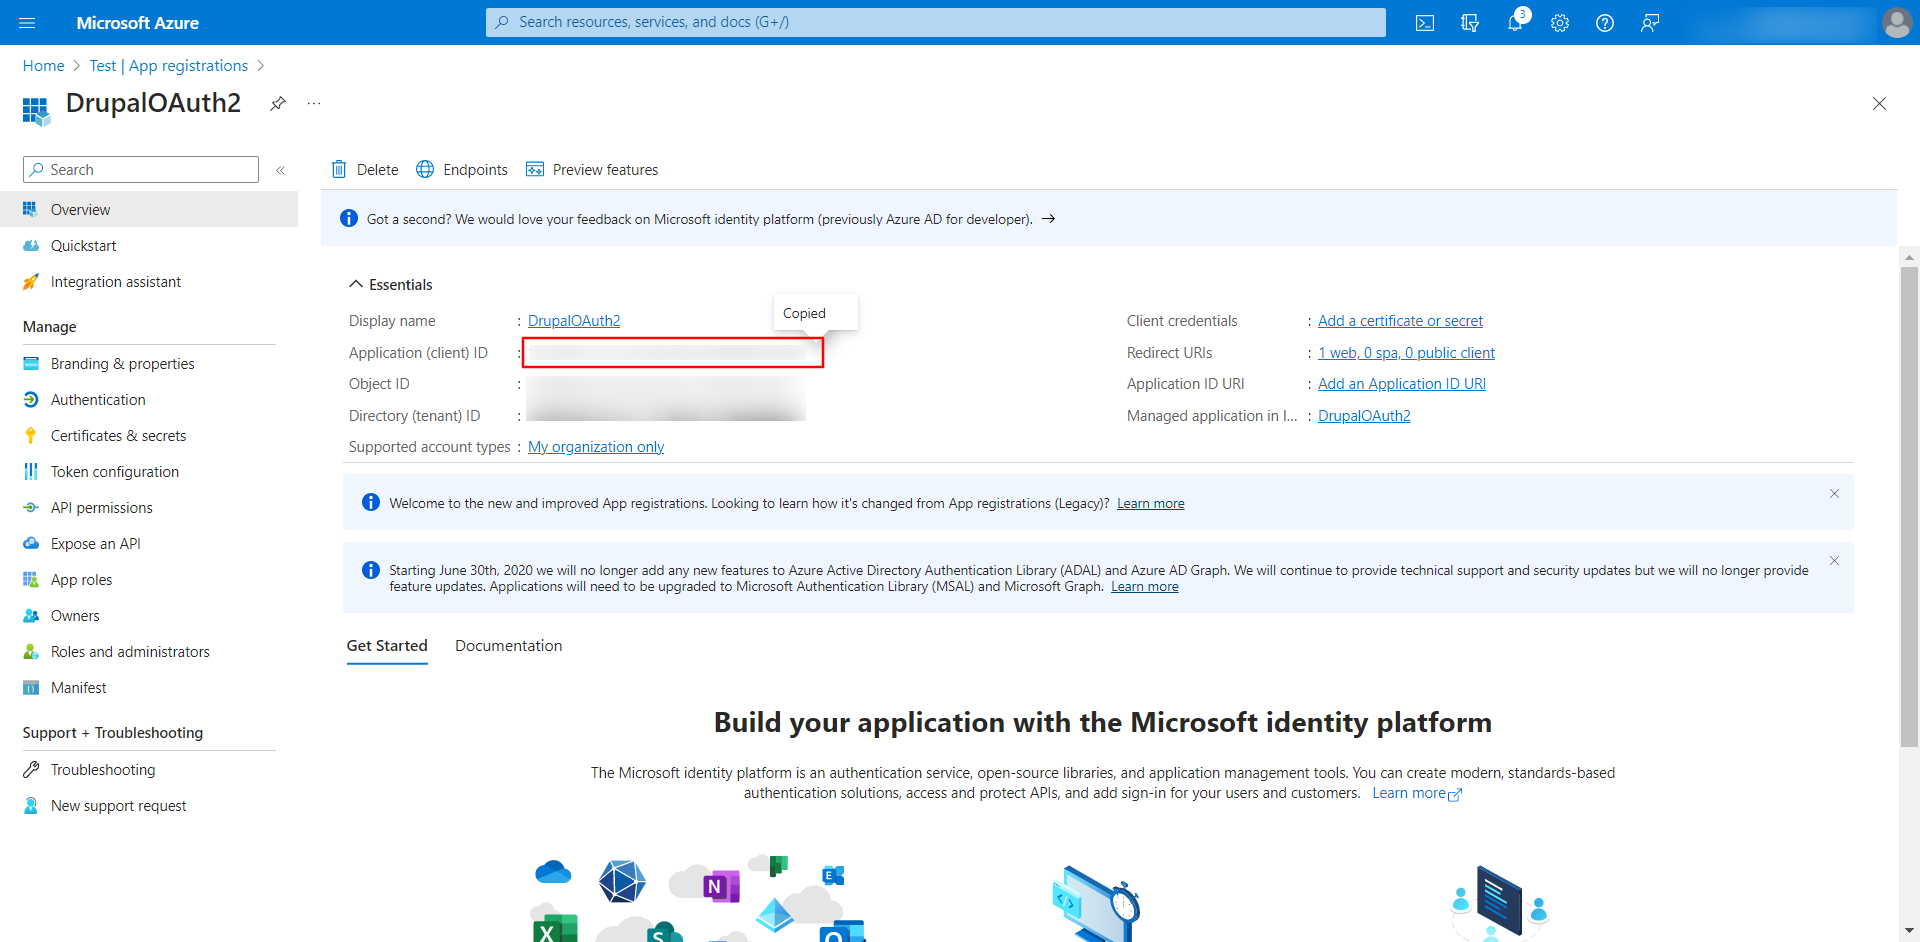 Microsoft Azure Office 365 - Copy the Application (client) ID